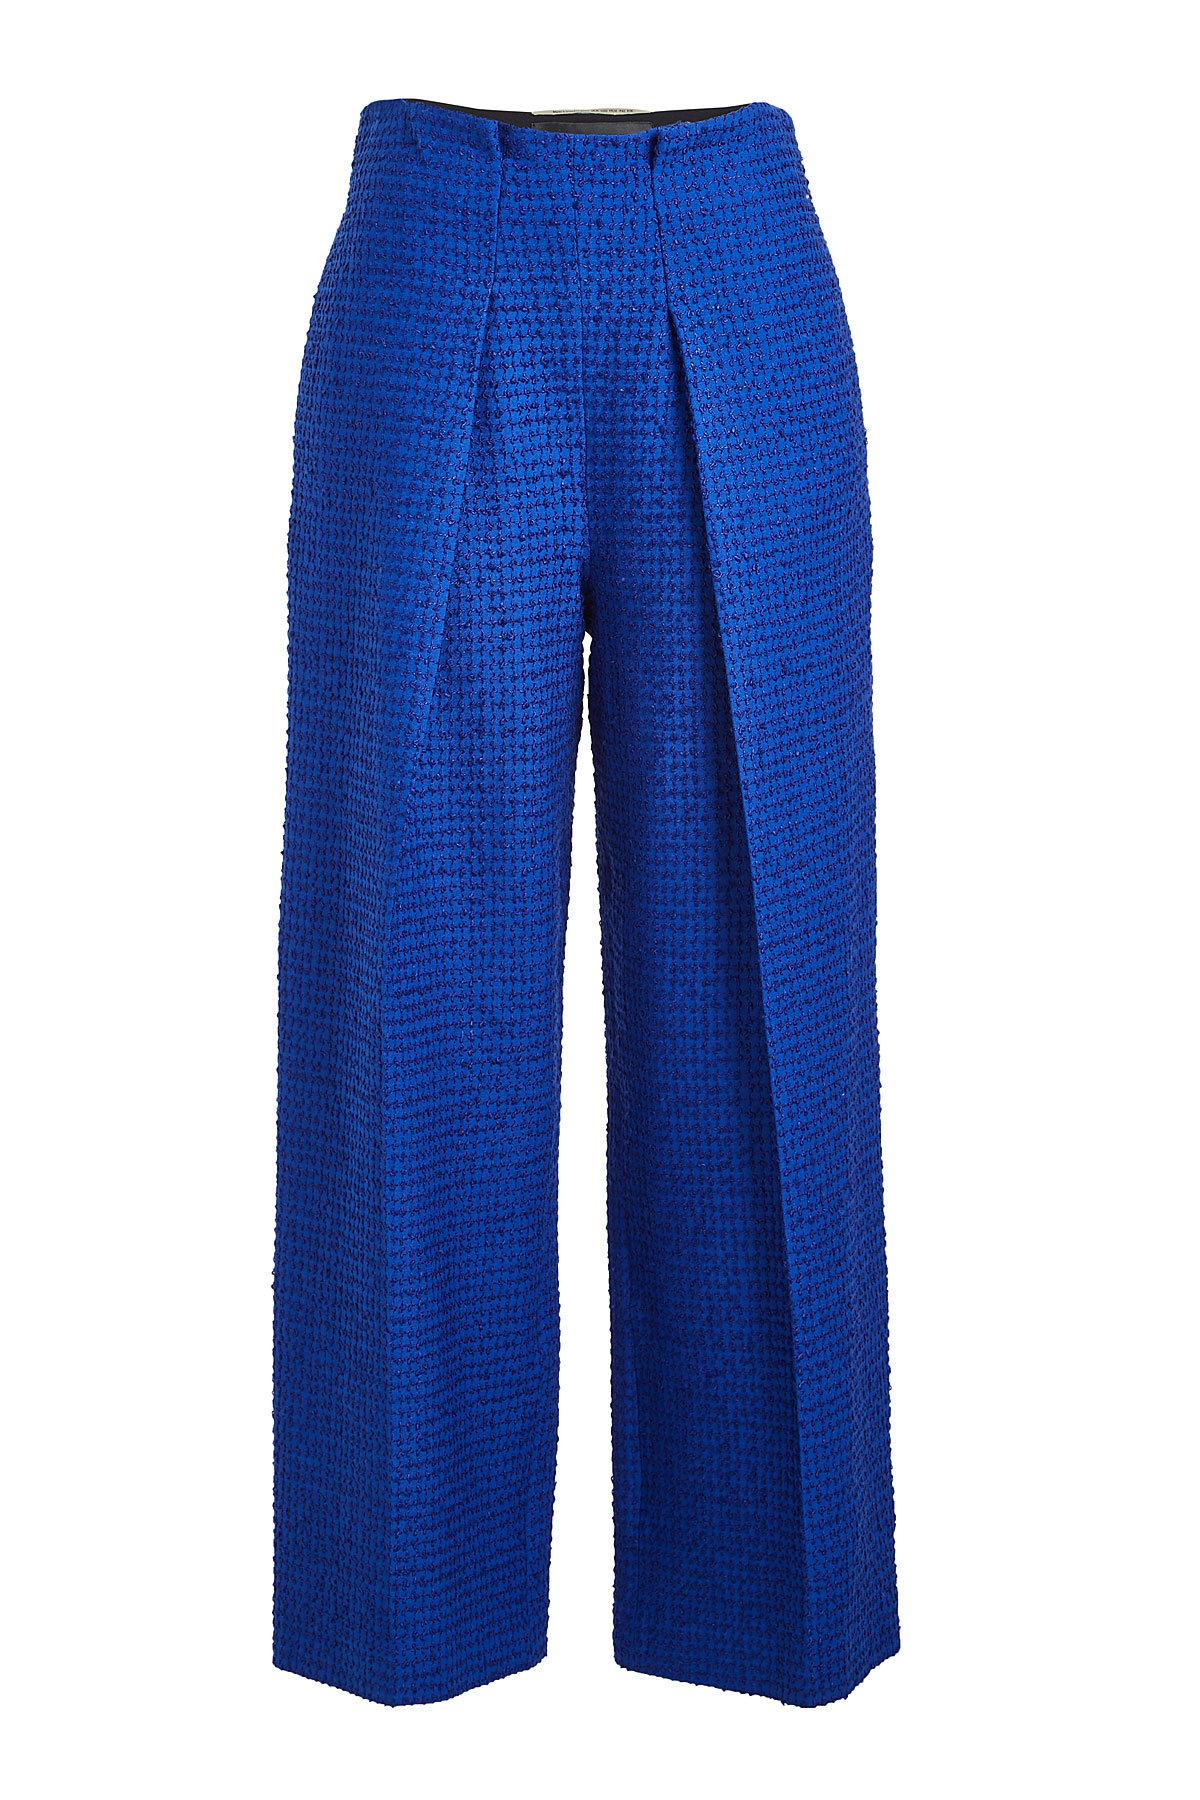 Meltham Pants with Cotton and Linen by Roland Mouret